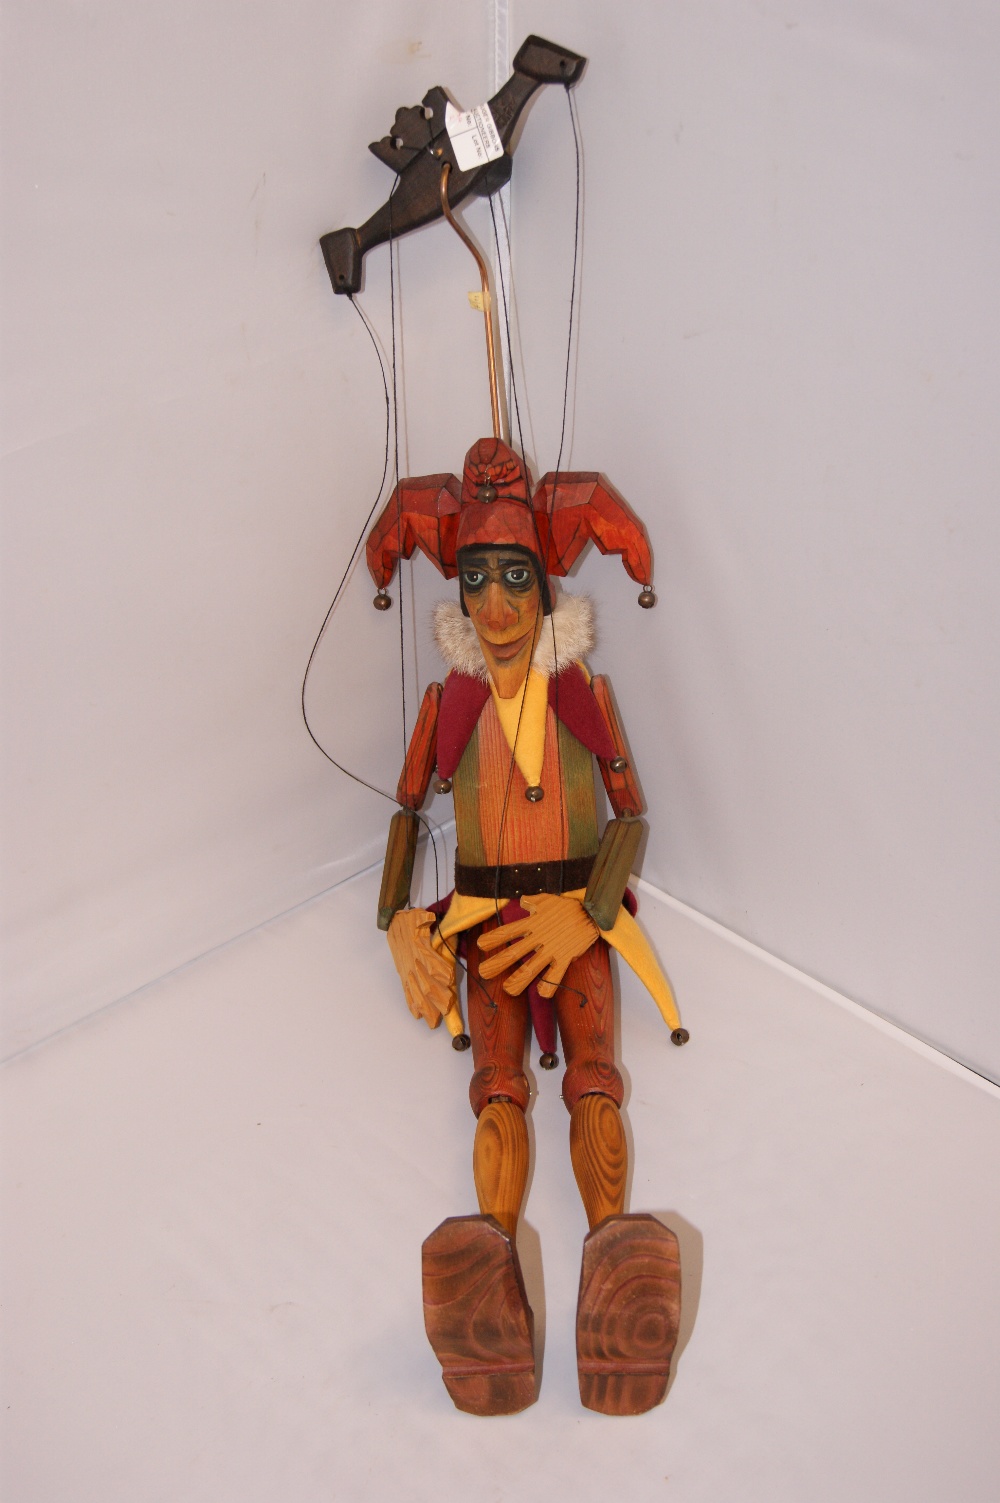 Jester marionette, meticulously handcrafted from linden wood, hand-painted with waterproof